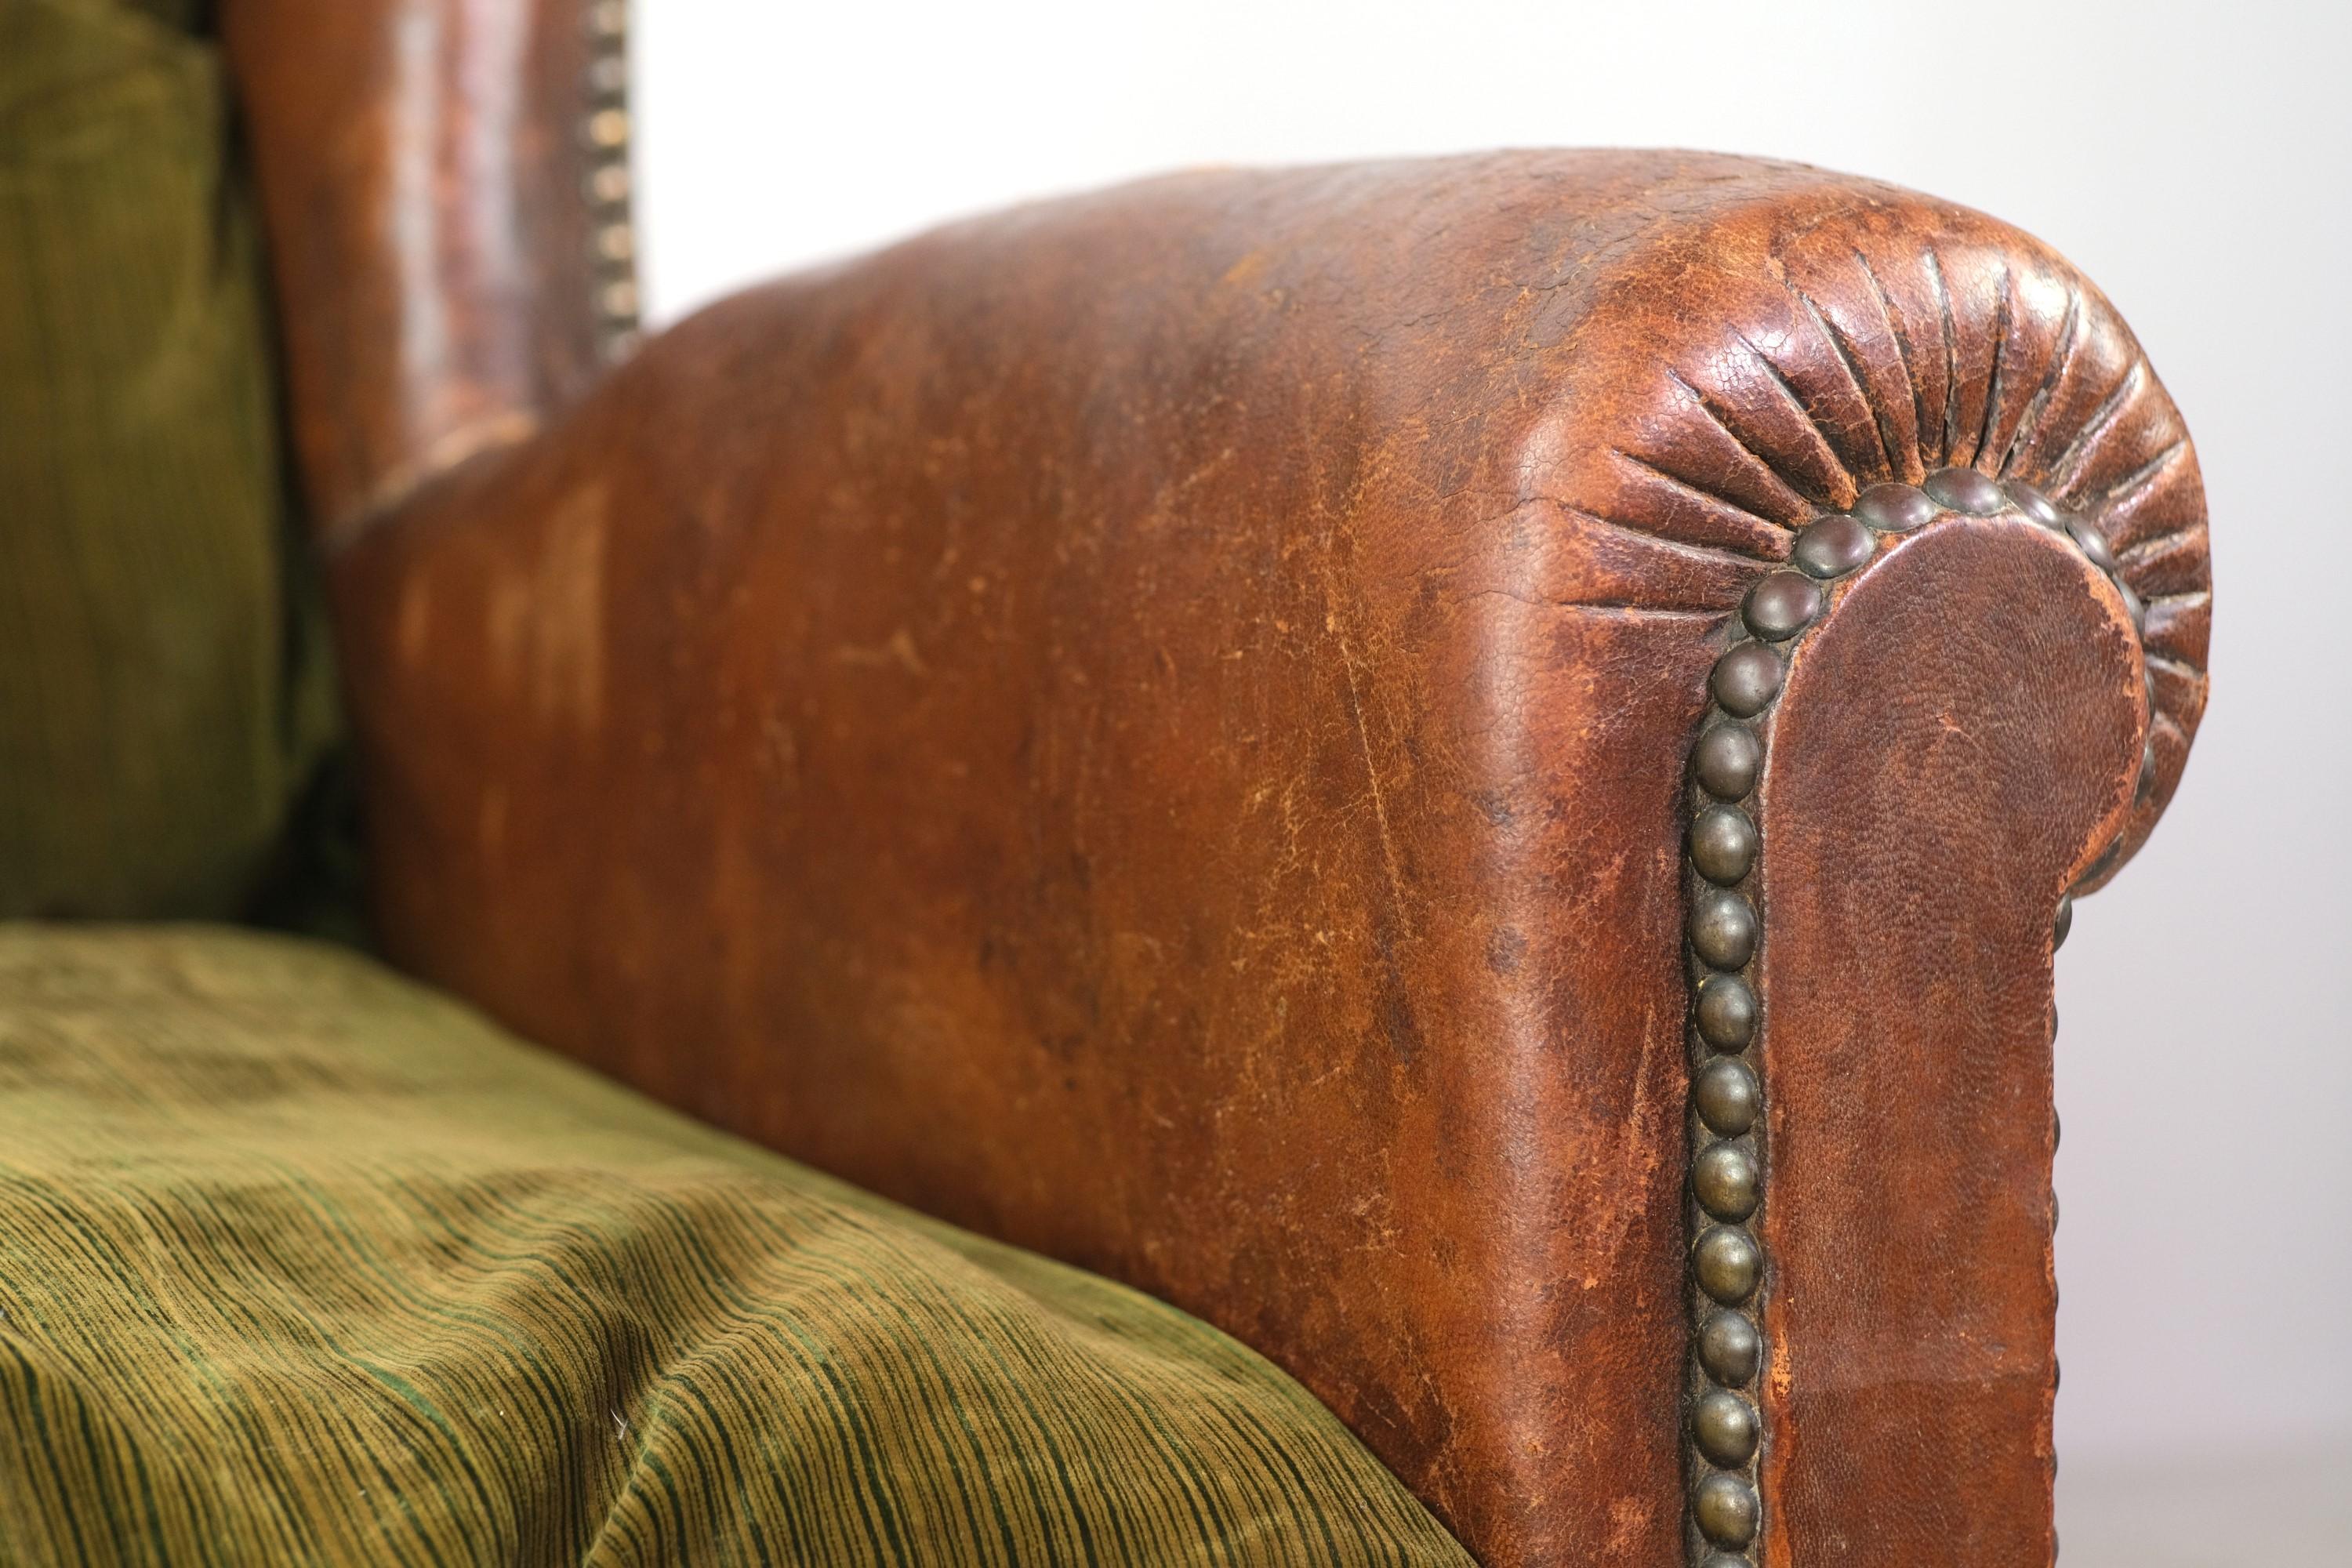 European brown leather club chair with green stripped velvet seat cushion. It features brass nail head studs detail all along the frame and has a warm natural patina. Adding to the style are round wood legs in the front. There is expected wear from